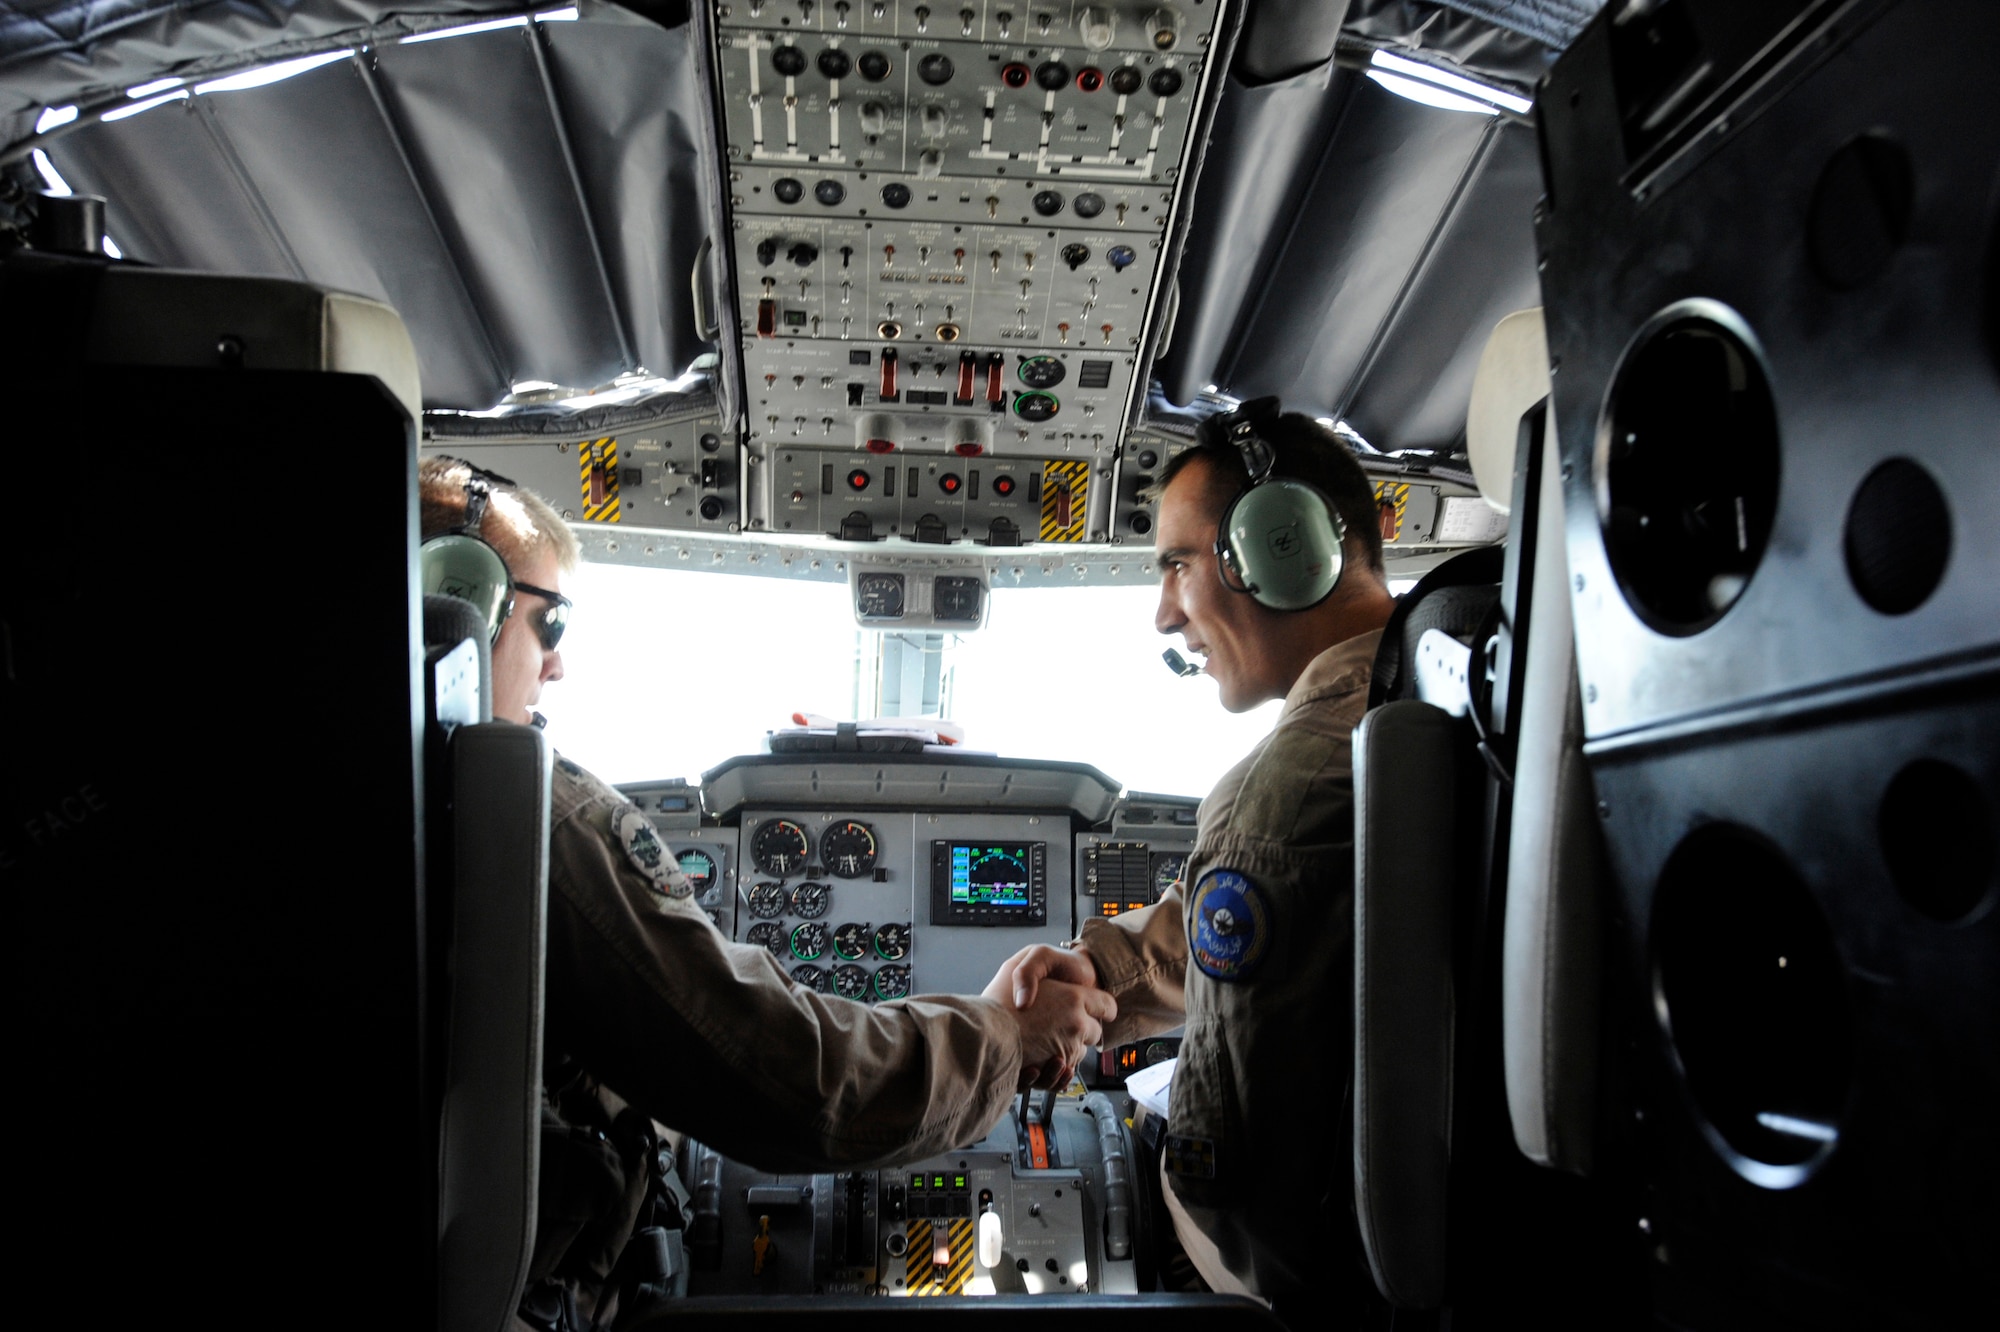 U.S. Air Force Lt. Col. James Piel,left, 538th Air Expeditionary Advisory Squadron commander and C-27 Spartan pilot-mentor and First Lieutenant Faiz M. Ramaki, an Afghanistan National Army Air Corps (ANAAC) C-27 pilot, shake hands after a successful landing during the first operational mission of a C-27, March 24, 2010, at Kandahar Airfield, Afghanistan. After exiting the plane, the aircrew ended the day with handshakes and smiles. "This mission brings an unprecedented capability to Afghanistan," said Colonel Piel, a native of St. Louis, Mo.  (U.S. Air Force photo/Staff Sgt. Manuel J. Martinez/released)

